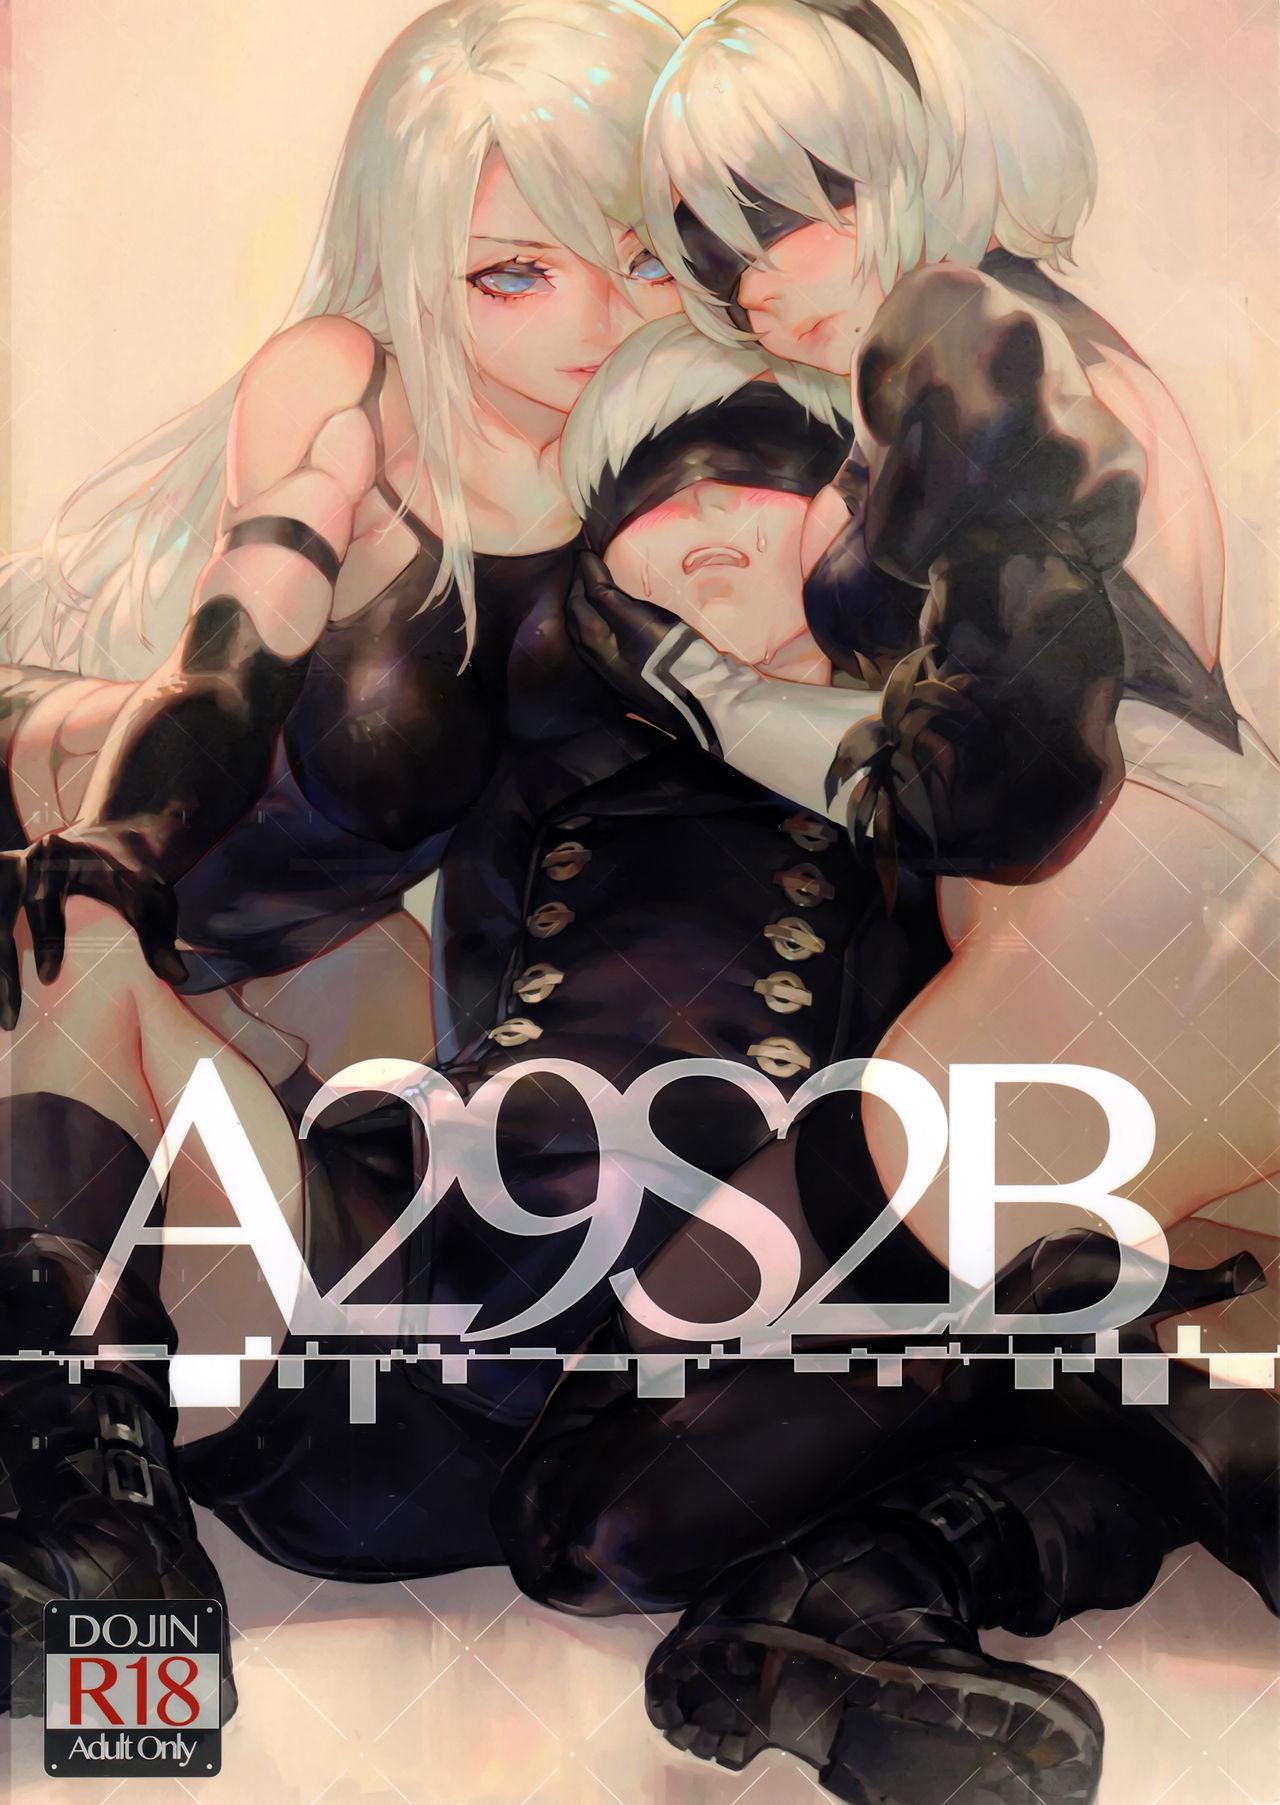 Cousin A29S2B - Nier automata Stockings - Page 1